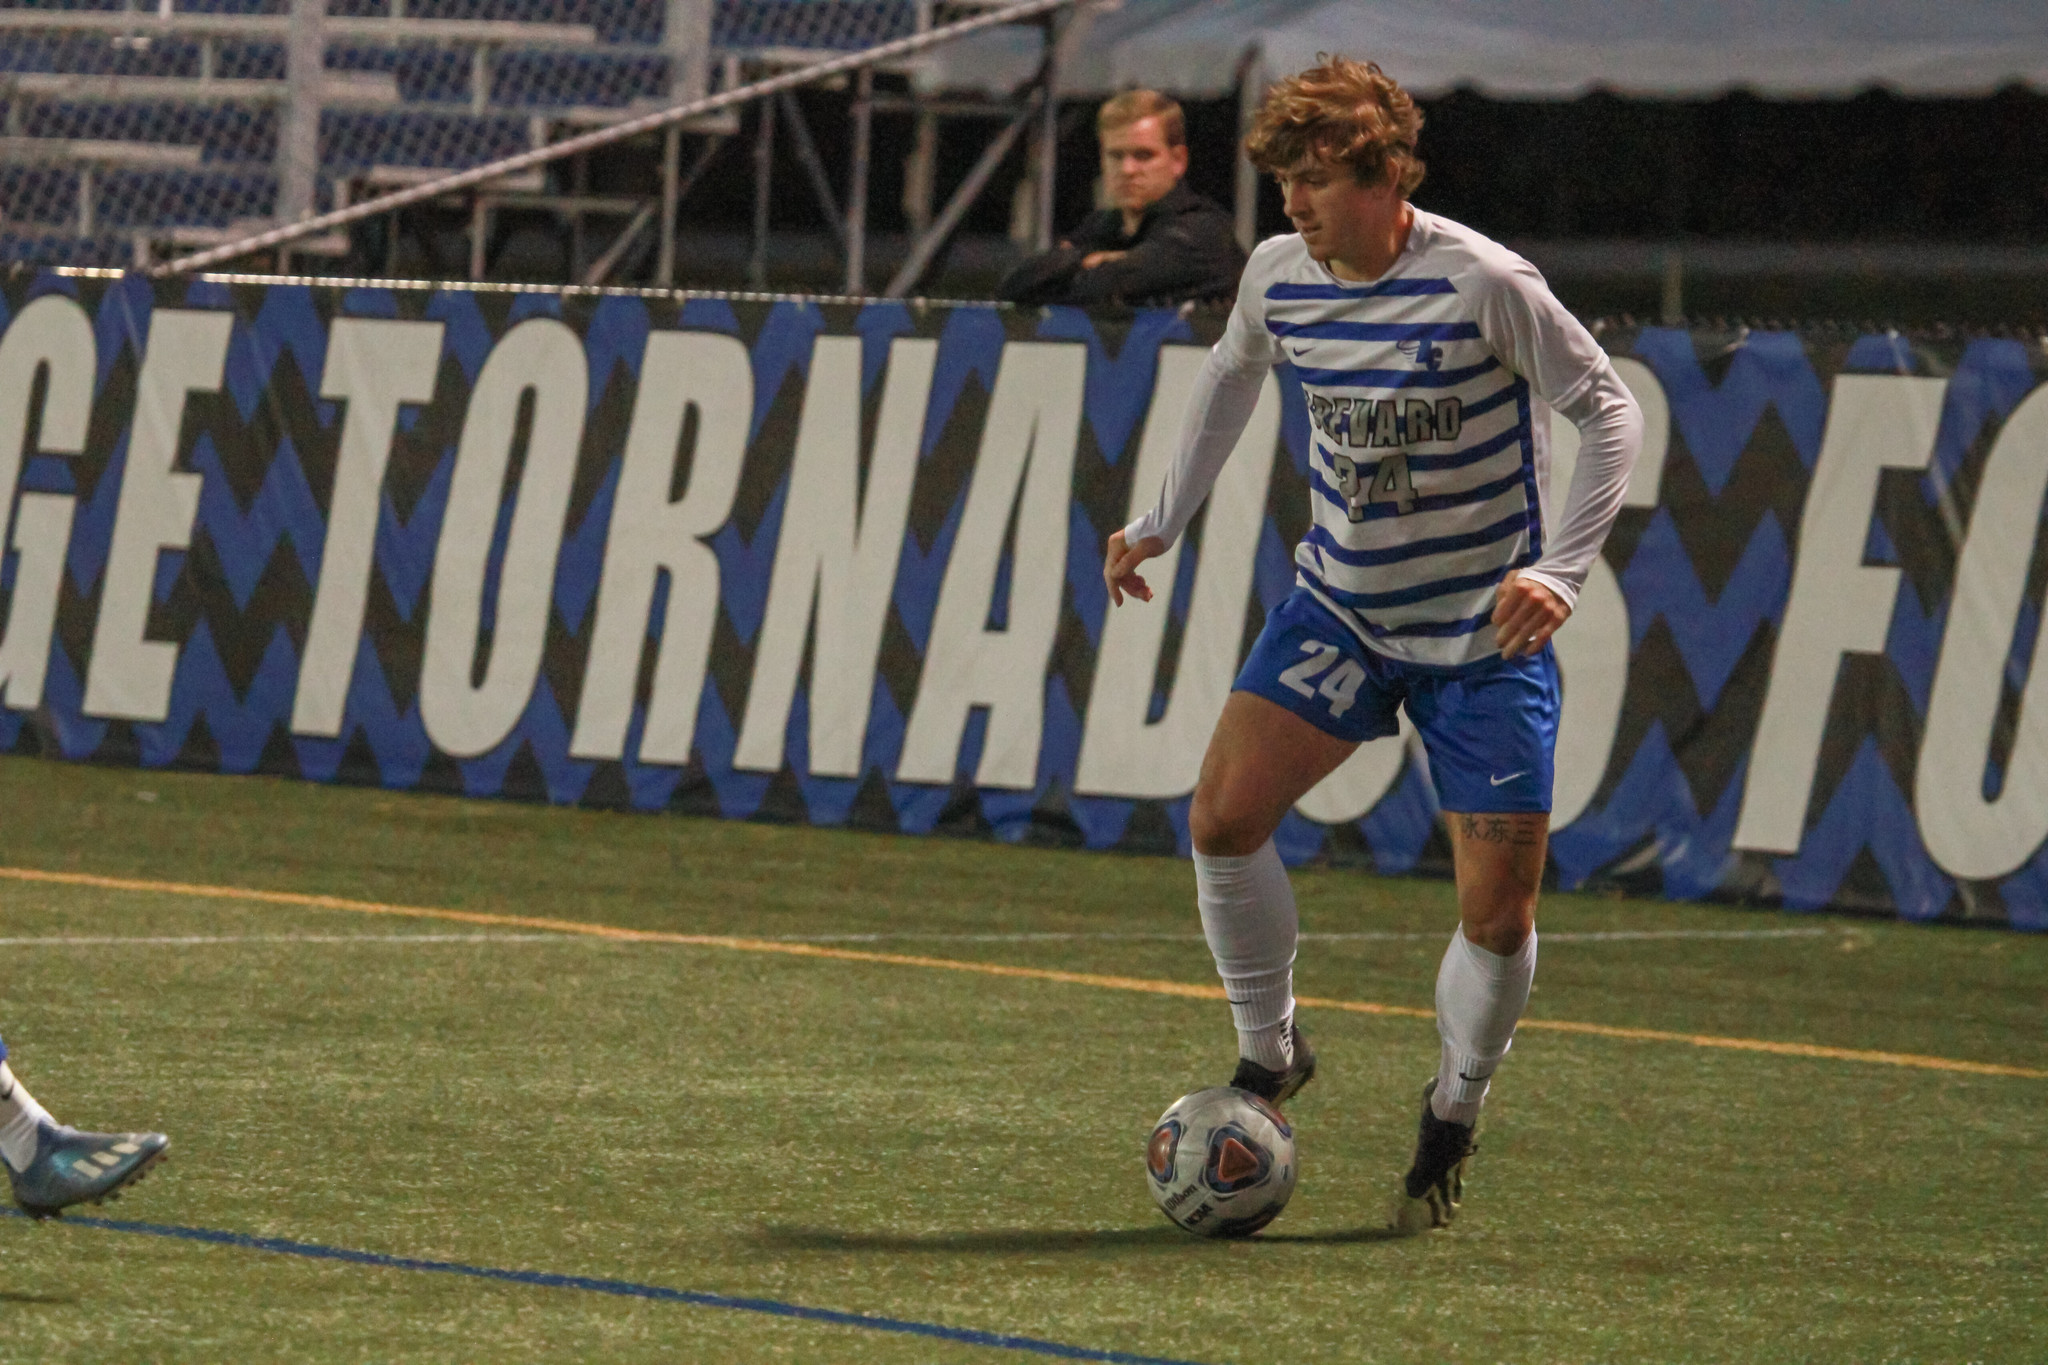 Lynch’s Last-Minute Goal Pushes Tornados Past Owls